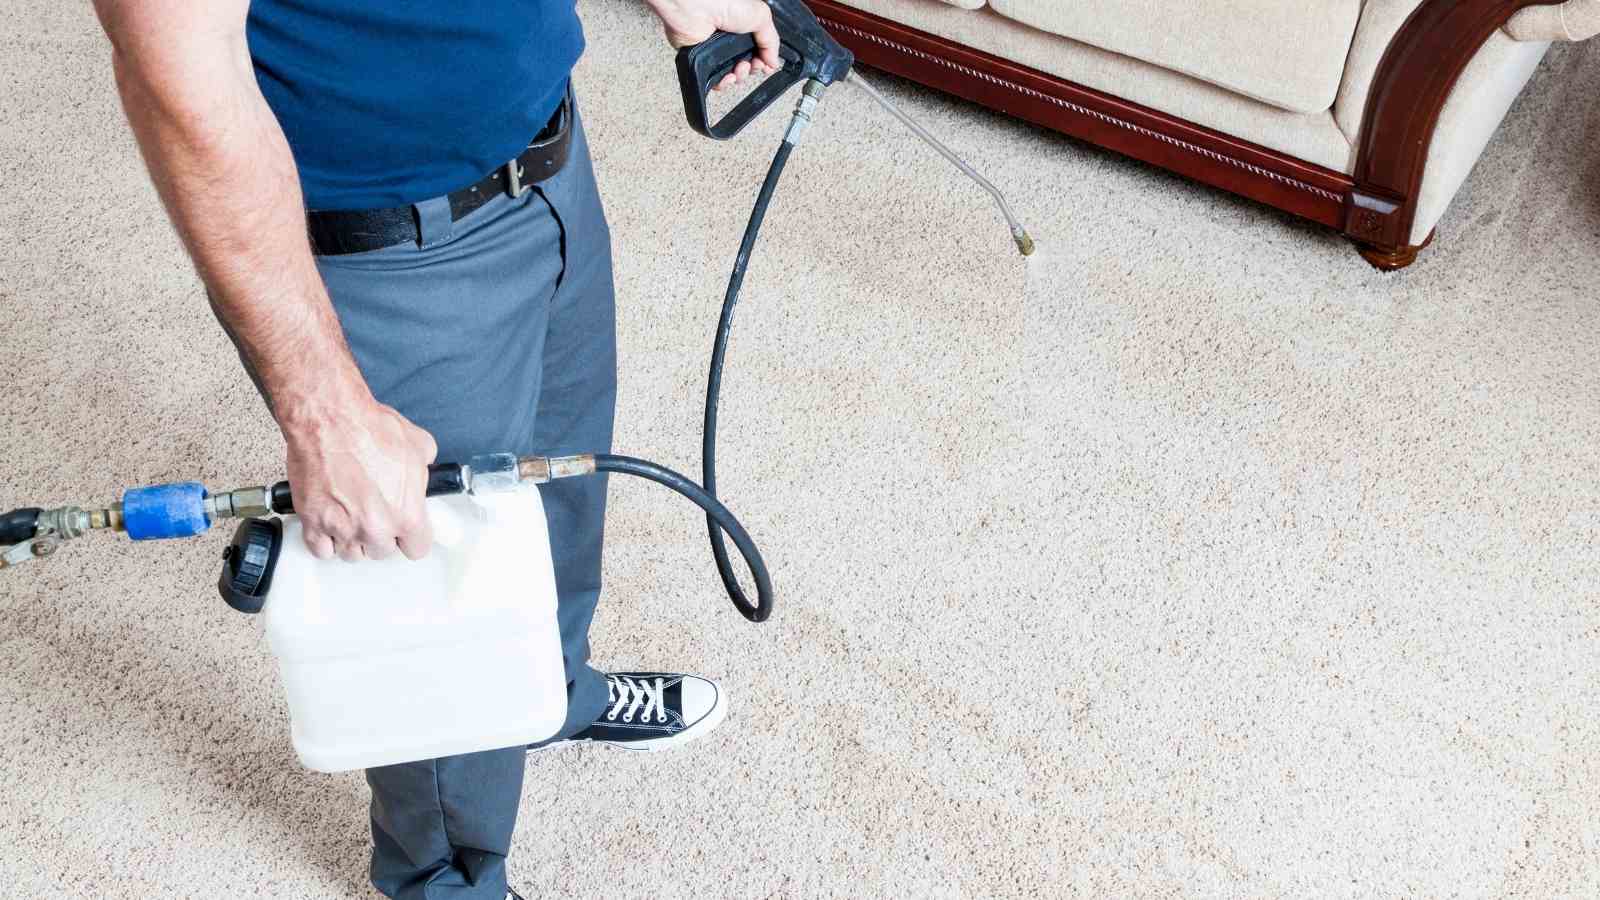 Carpet Cleaning Technician